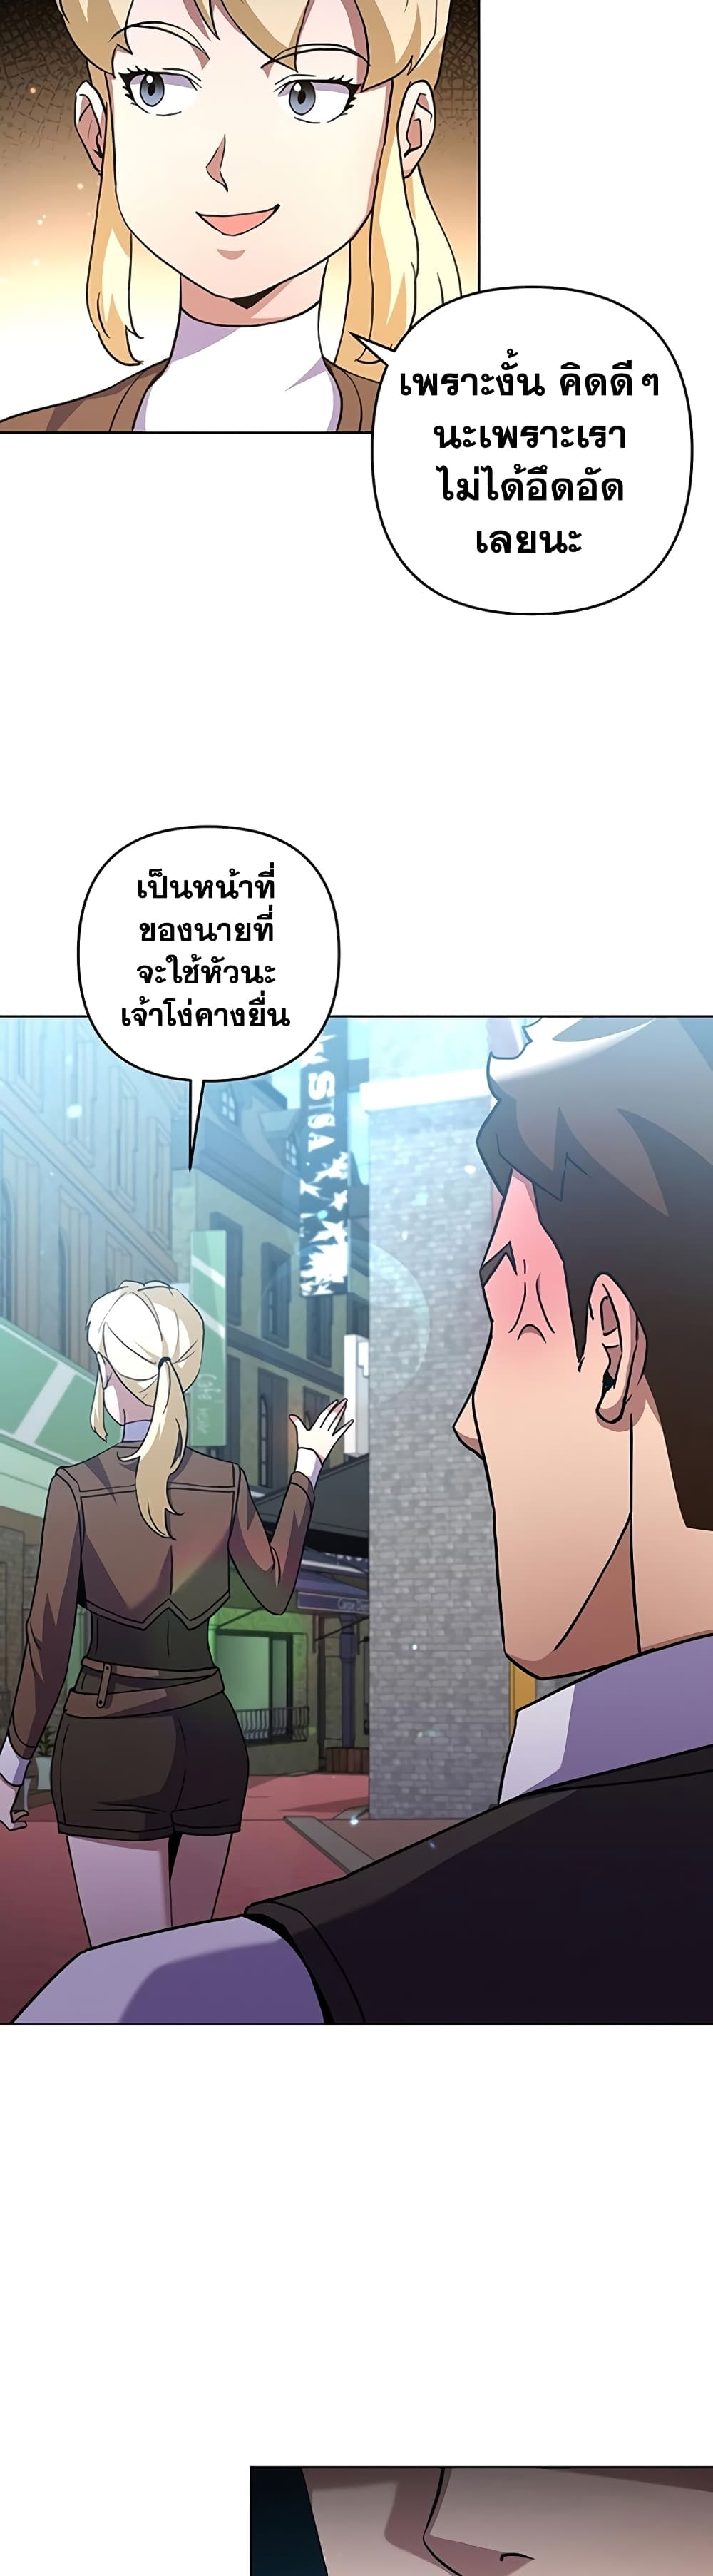 Surviving in an Action Manhwa 18 14